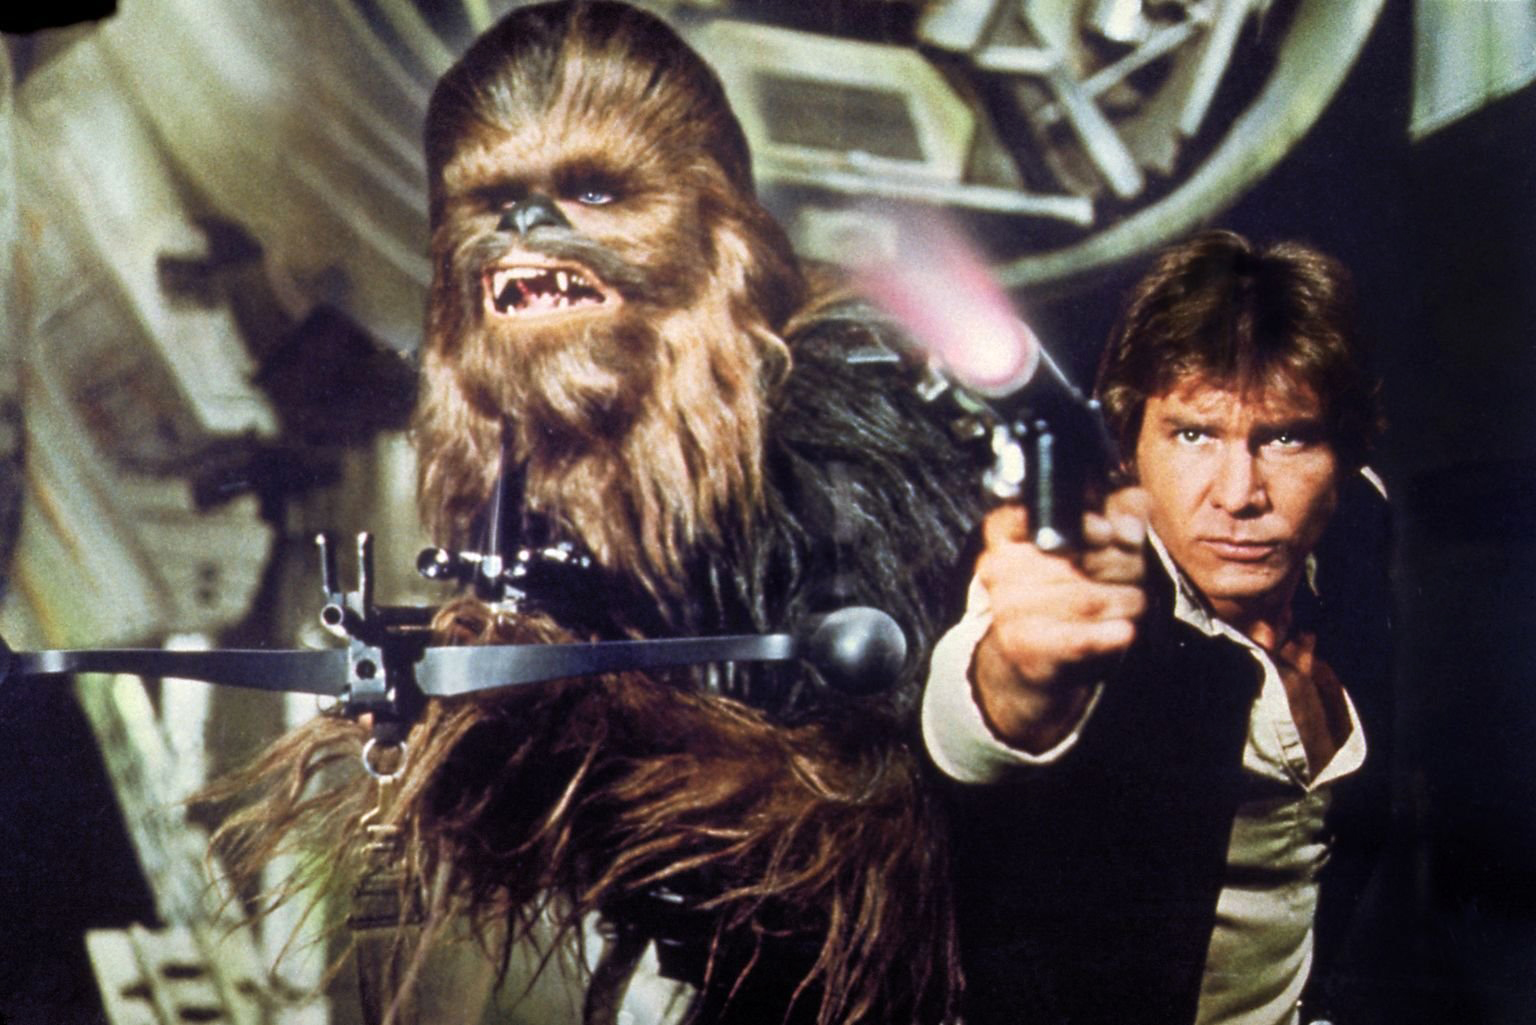 PHOTO: Peter Mayhew, left, as Chewbacca and Harrison Ford as Han Solo in a scene from "Star Wars: Episode IV: A New Hope."